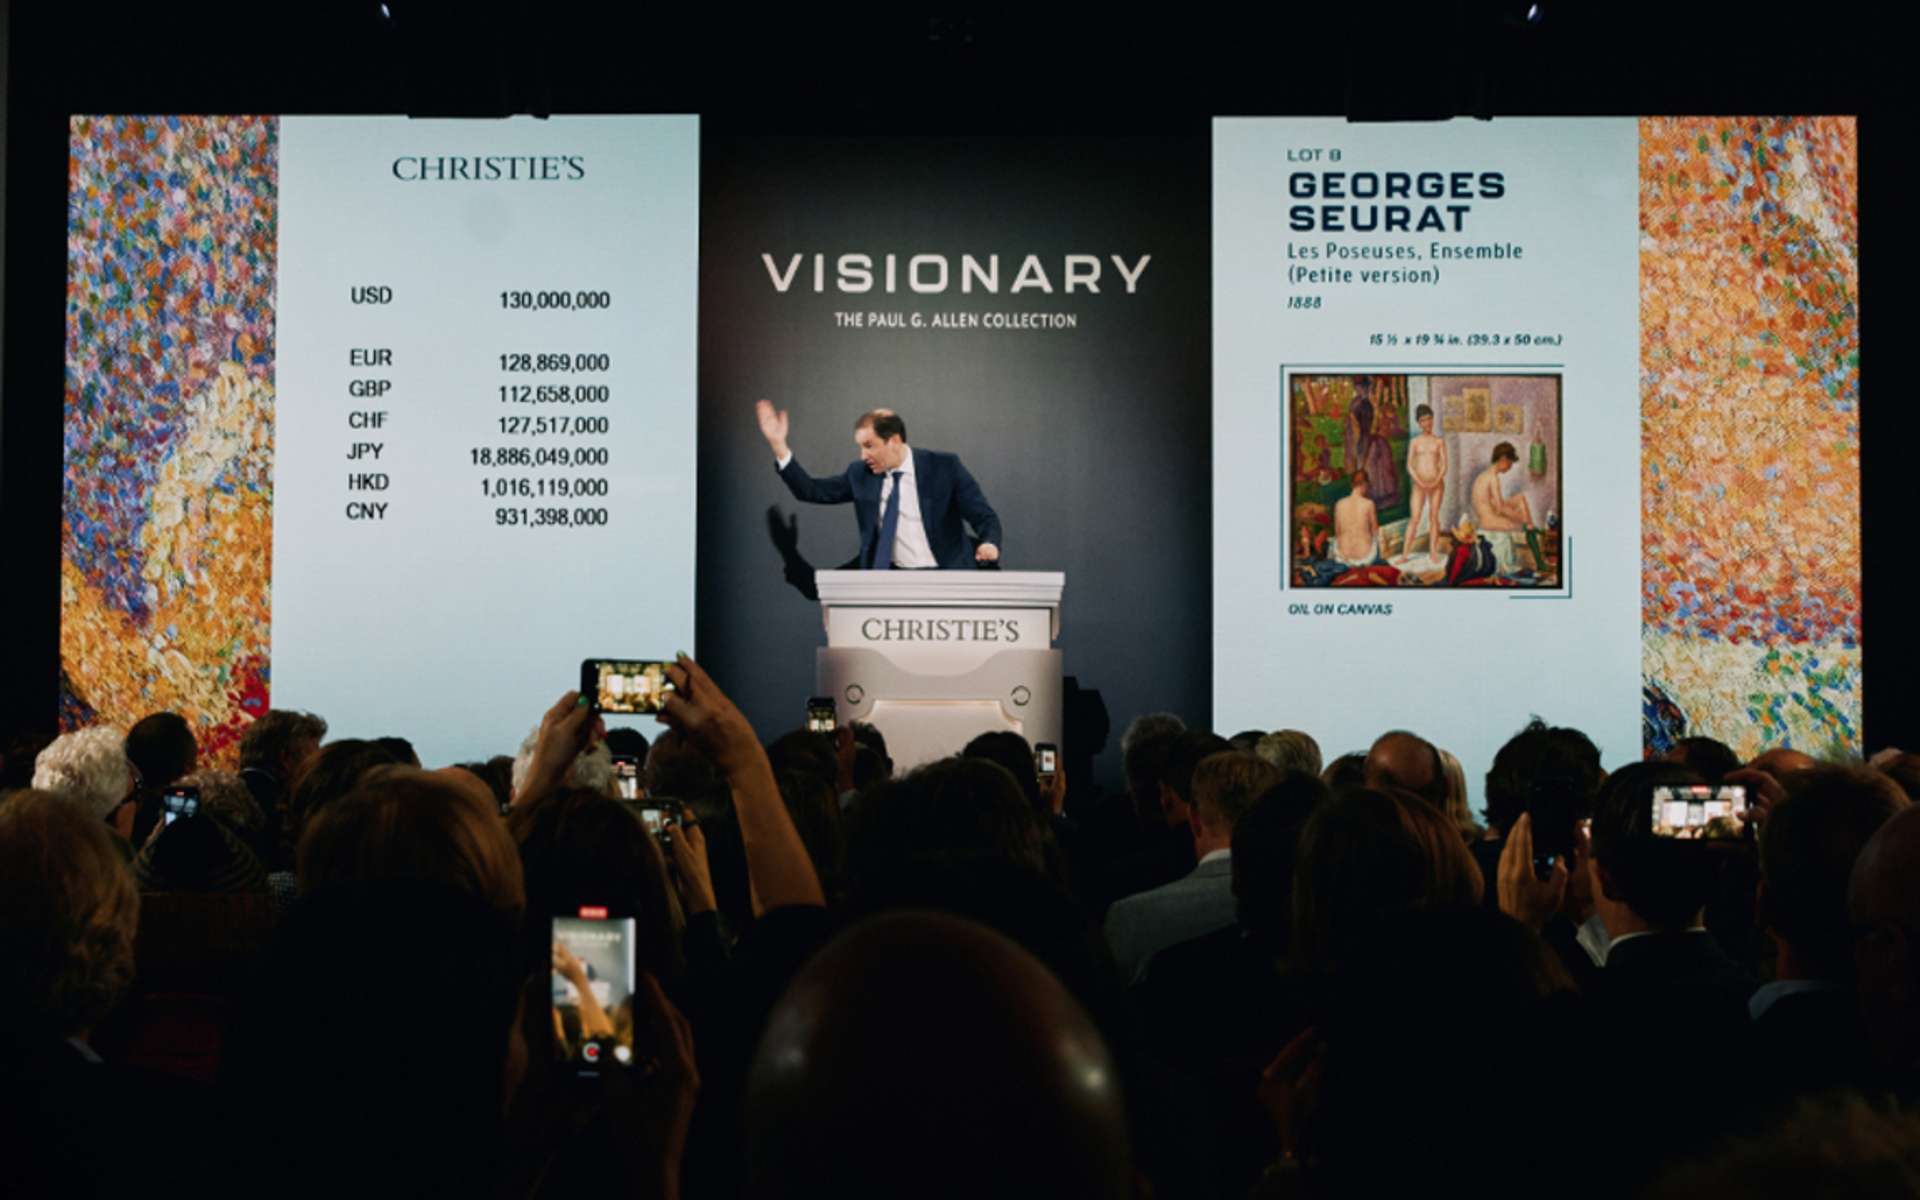 Live action bidding of  “Les Poseuses, Ensemble (Petite version)’’ by Georges Seurat during Visionary: Part 1 of the Paul G. Allen sale at Christie's New York.